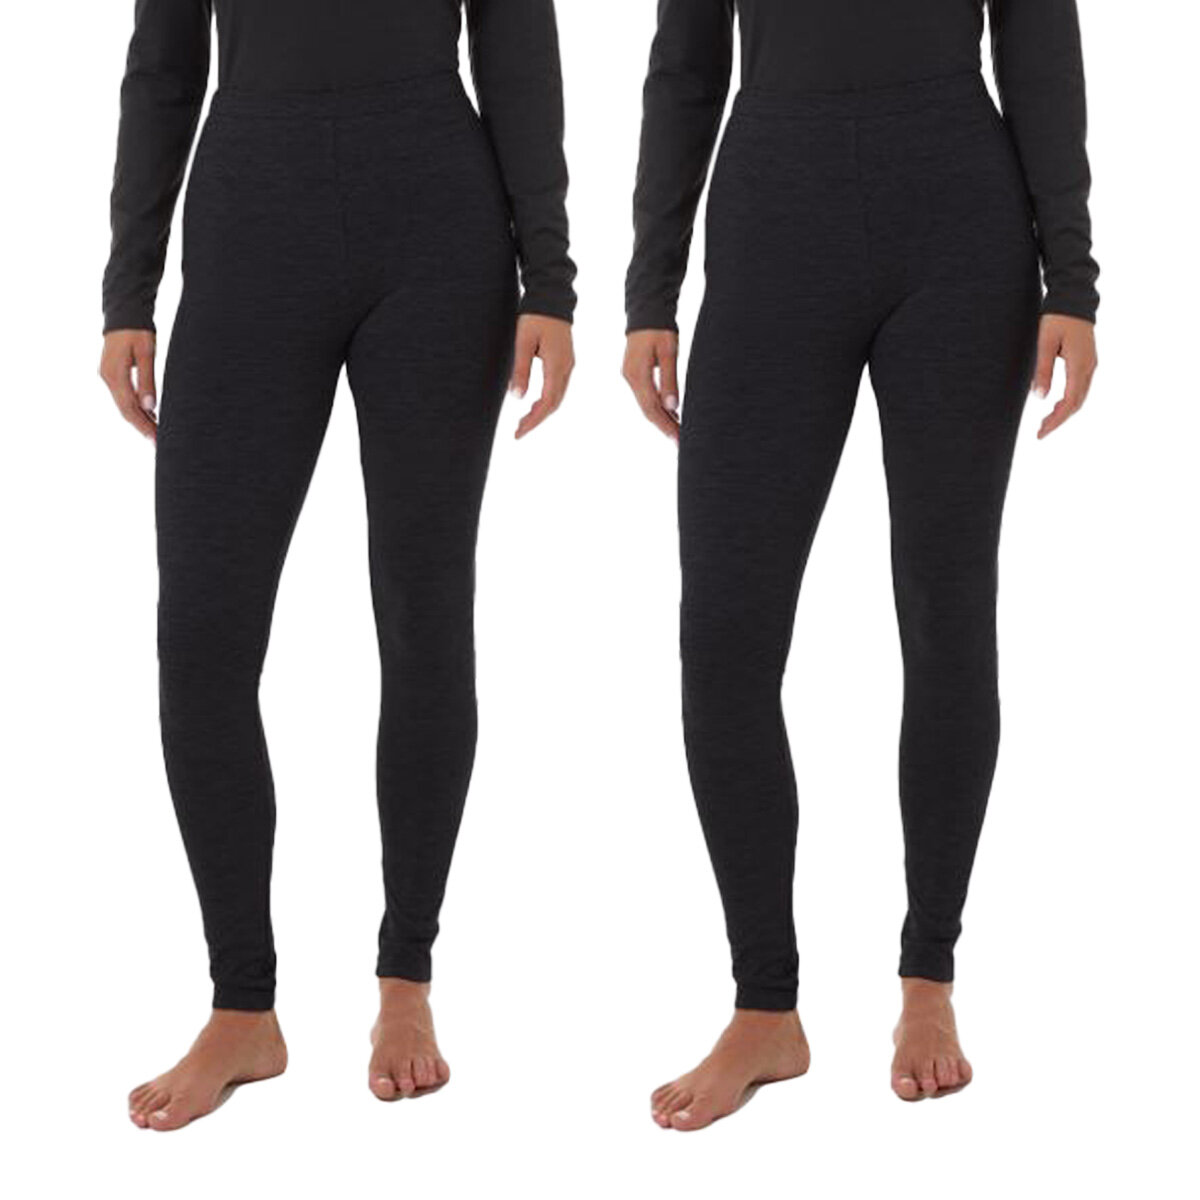 32 Degrees Baselayer Sale! 2 FOR $12 MIX & MATCH Baselayers – 4